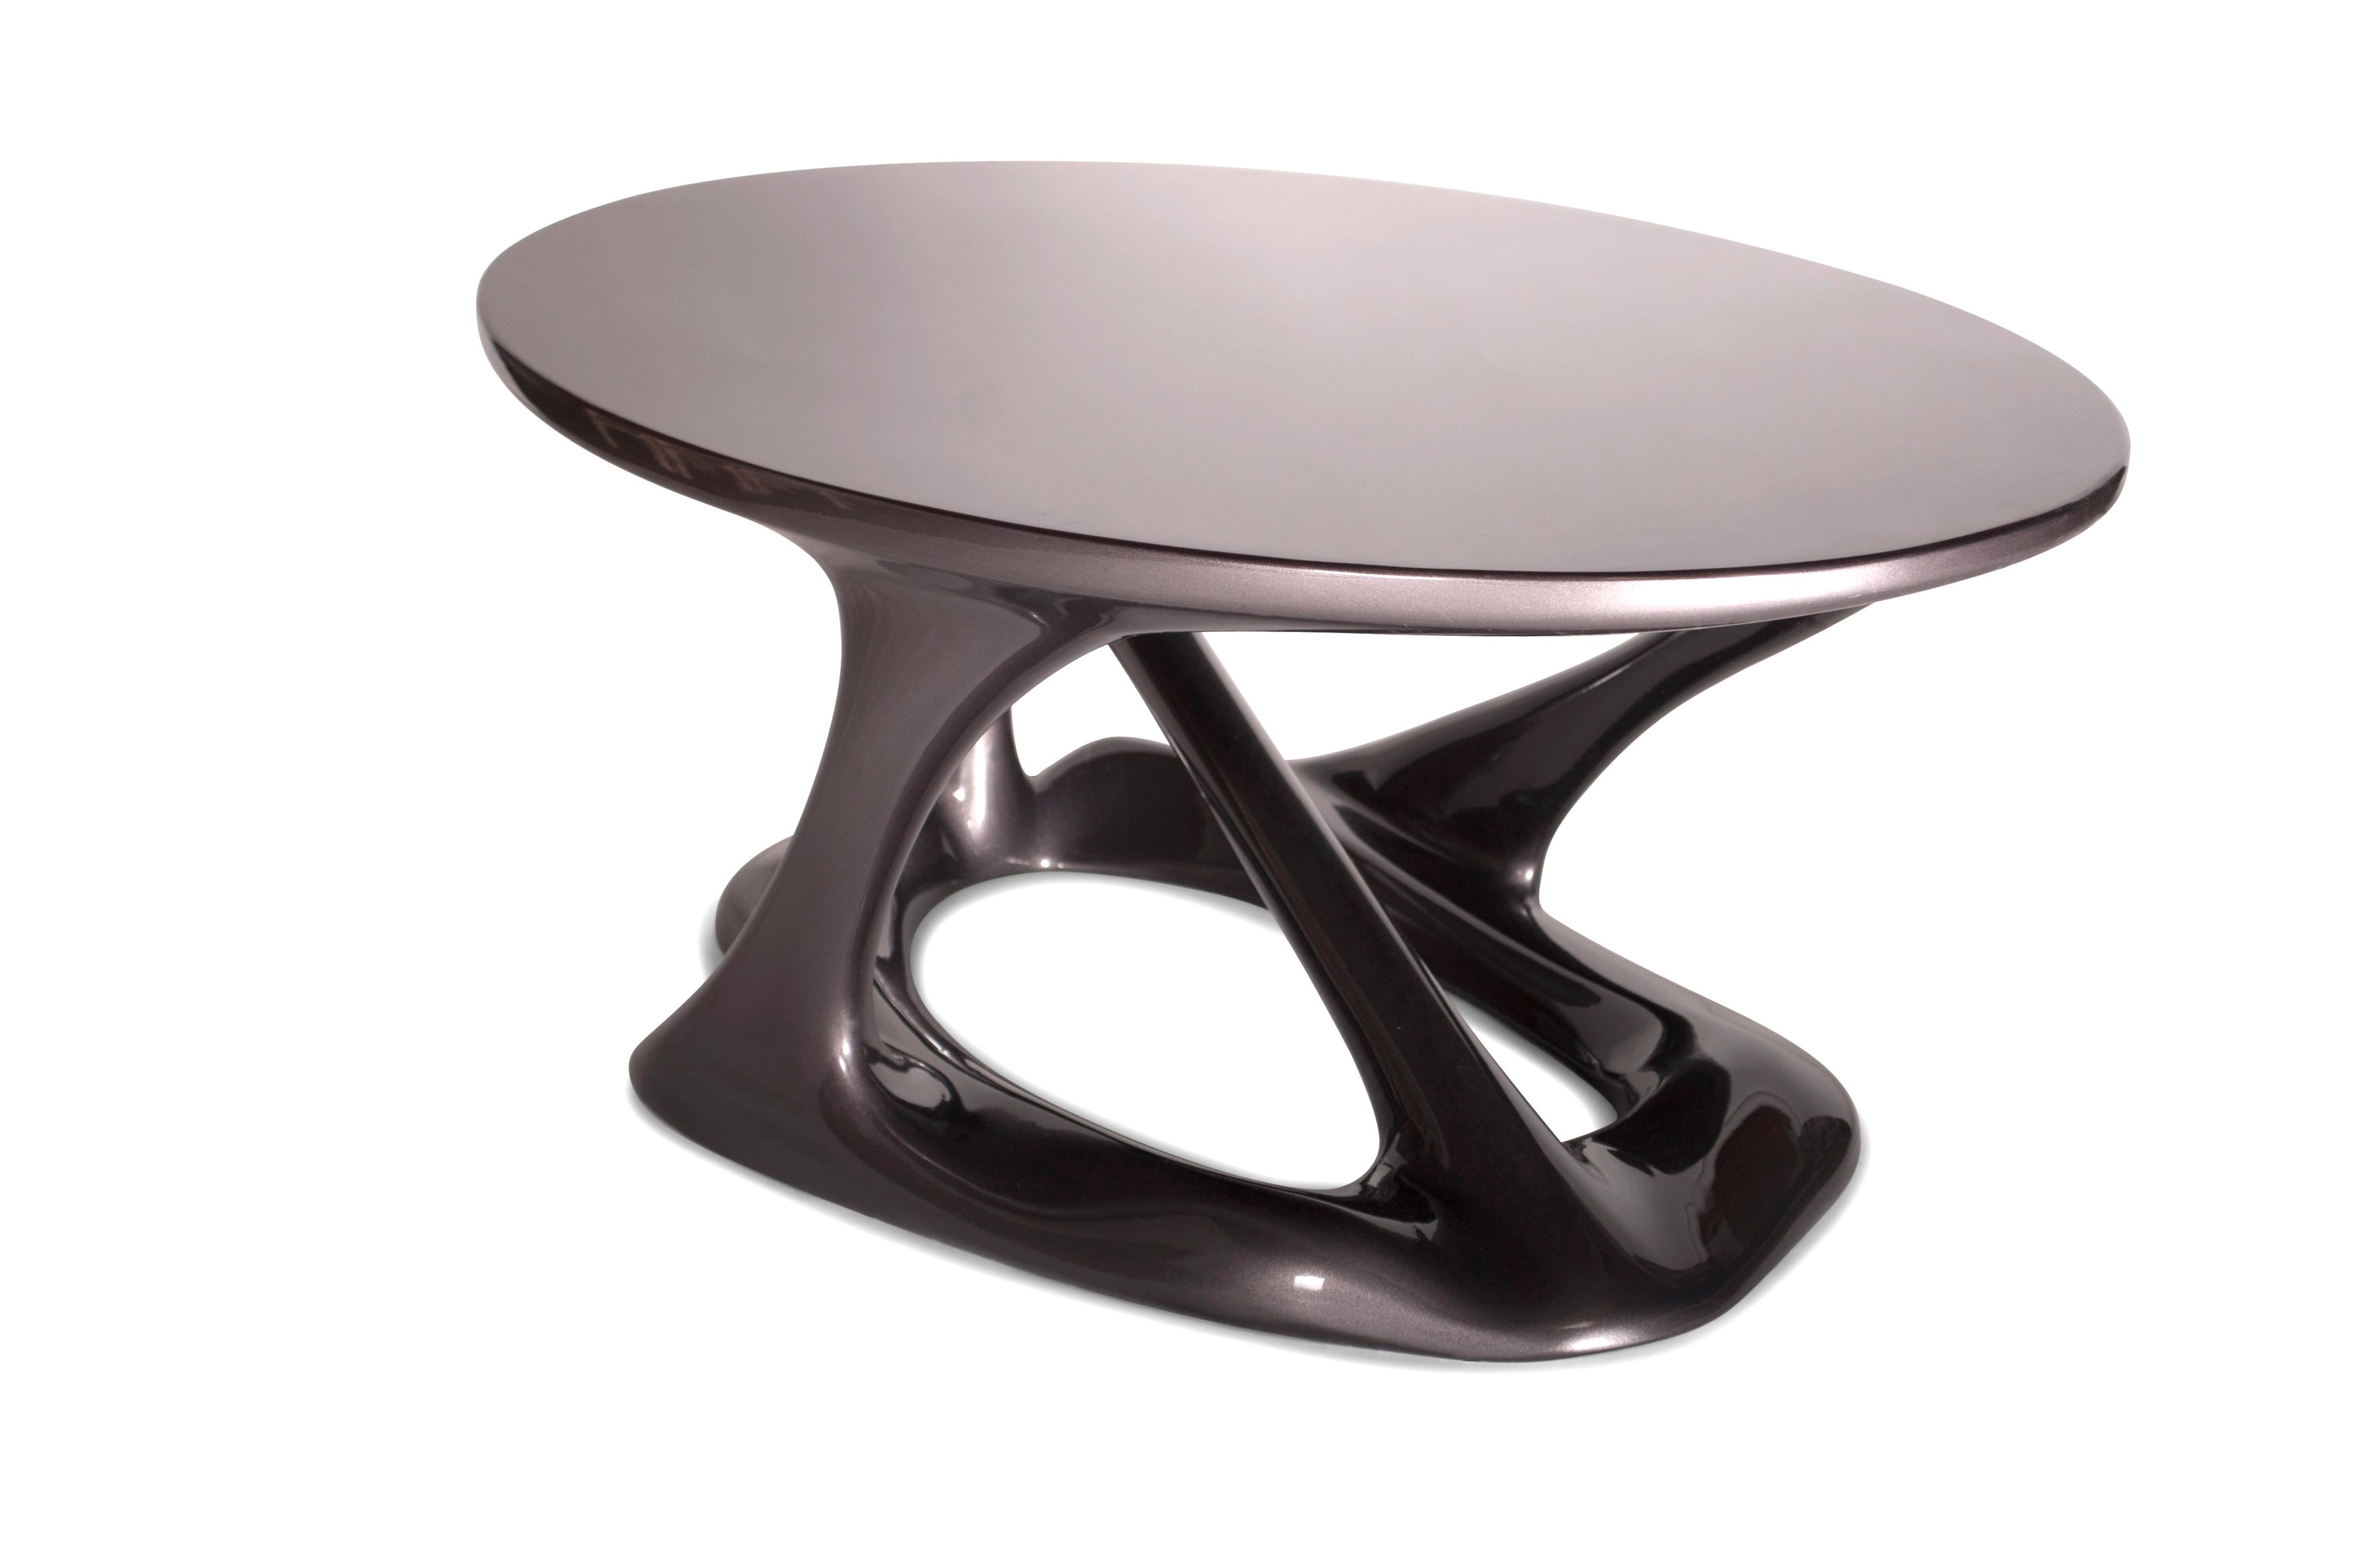 Amorph Tetra Table, Oval Shape, Dark Gray Metallic Finish  In New Condition For Sale In Los Angeles, CA